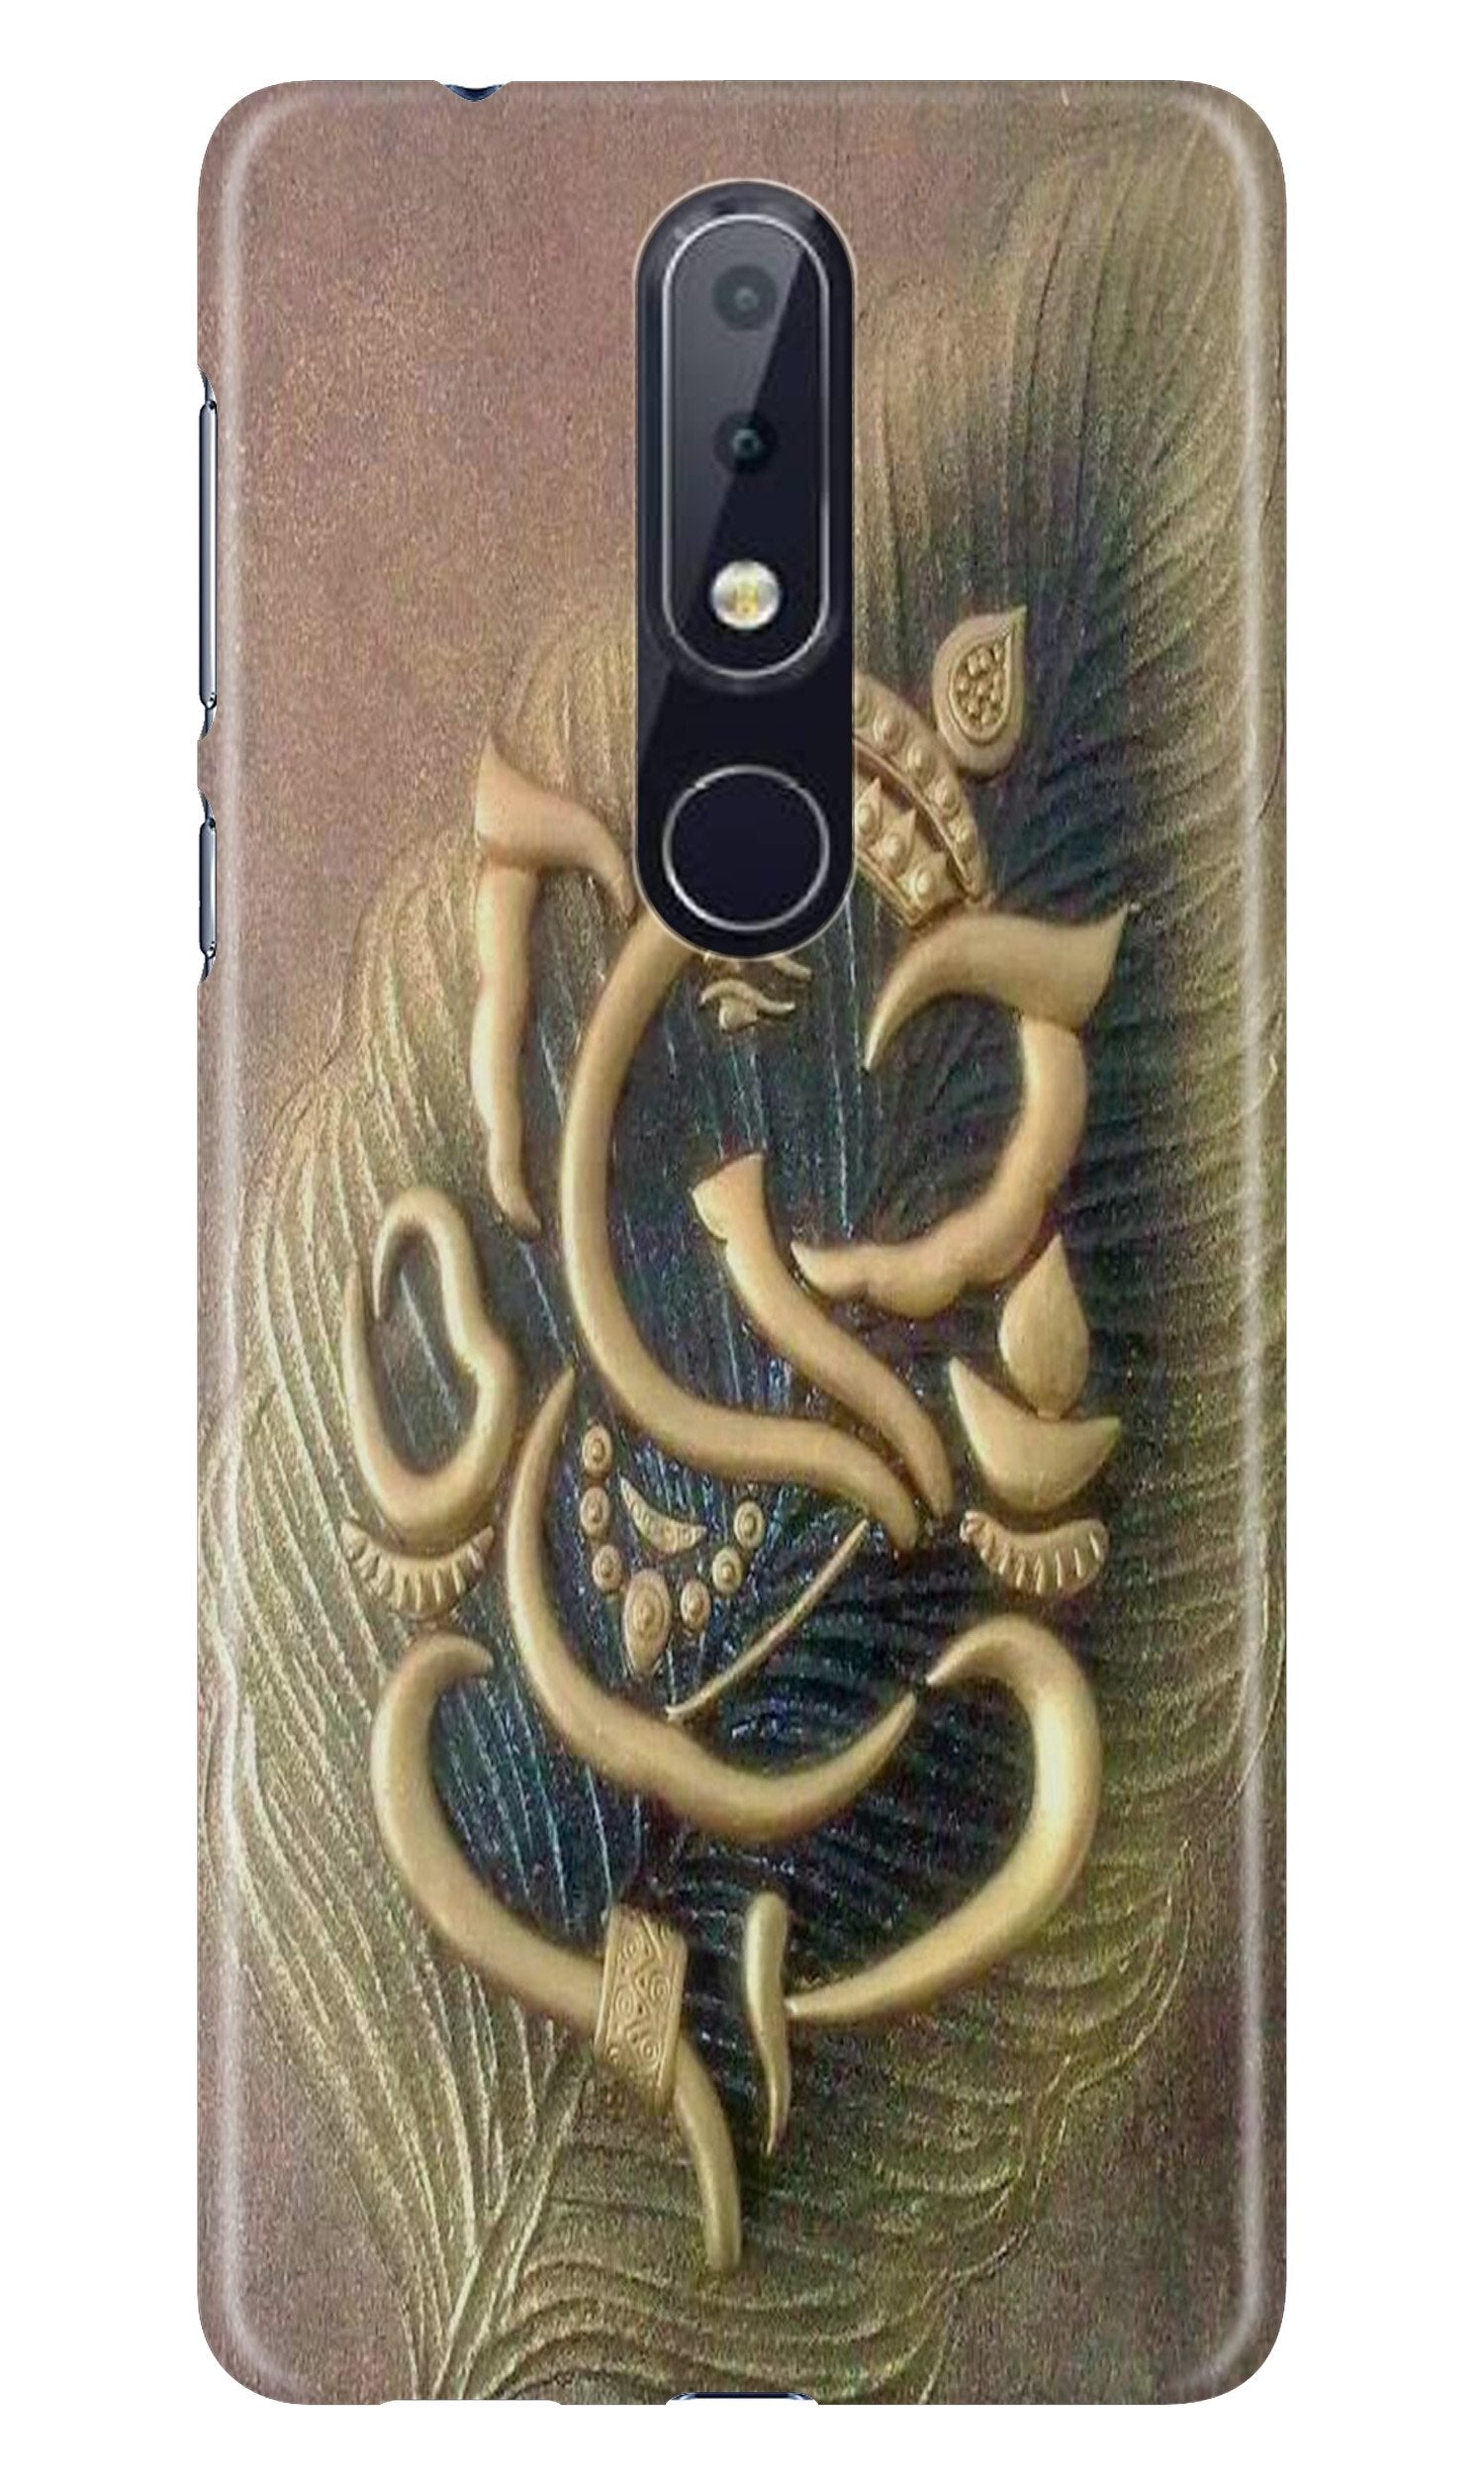 Lord Ganesha Case for Nokia 3.2